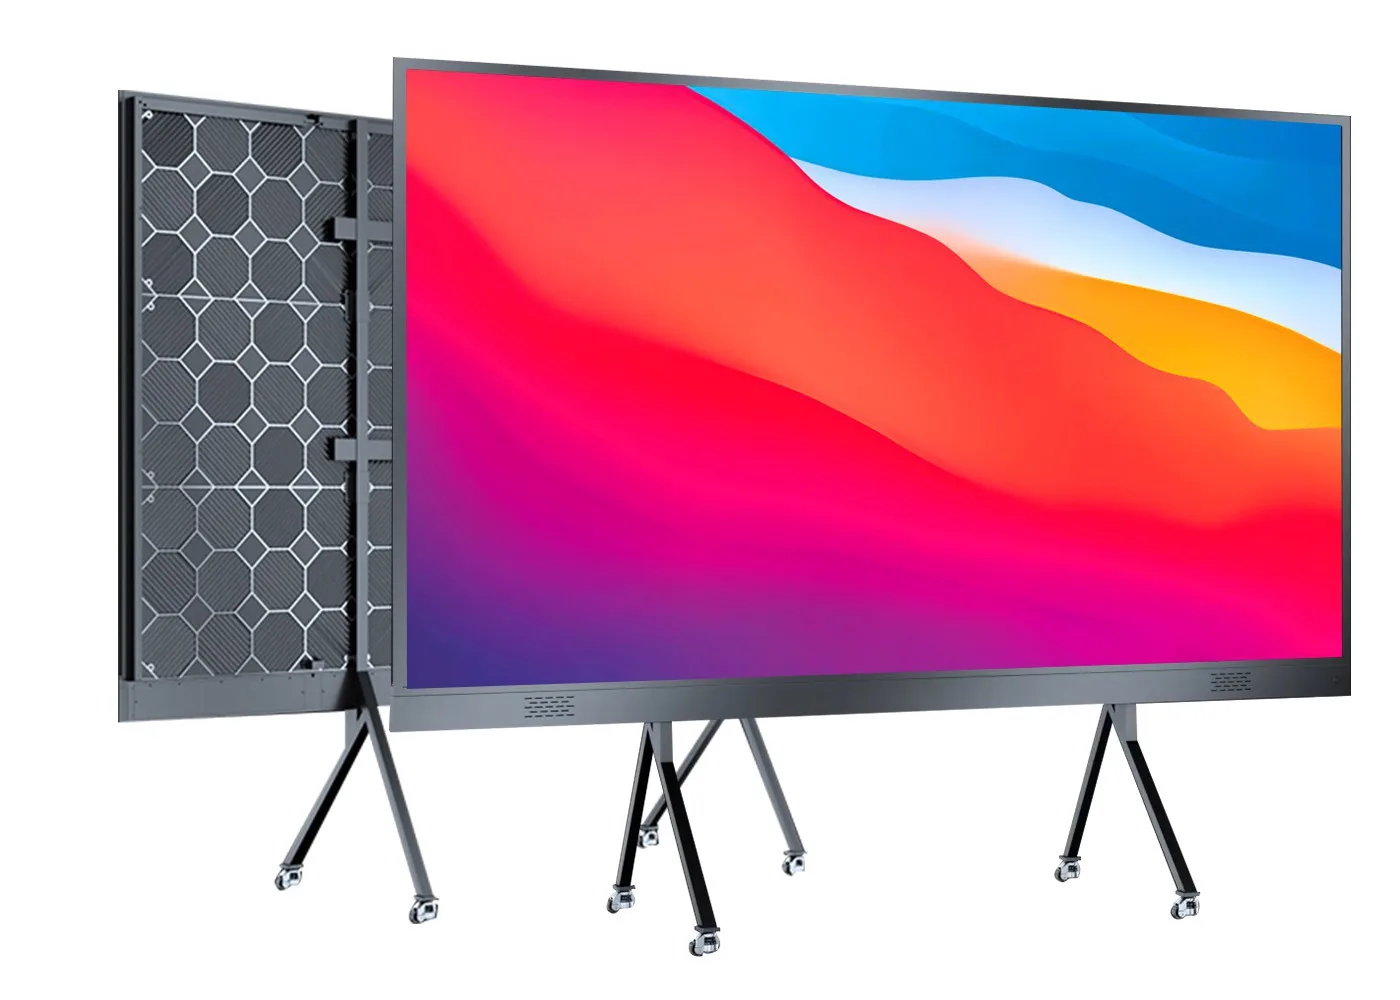 CA series All in One LED screen TV